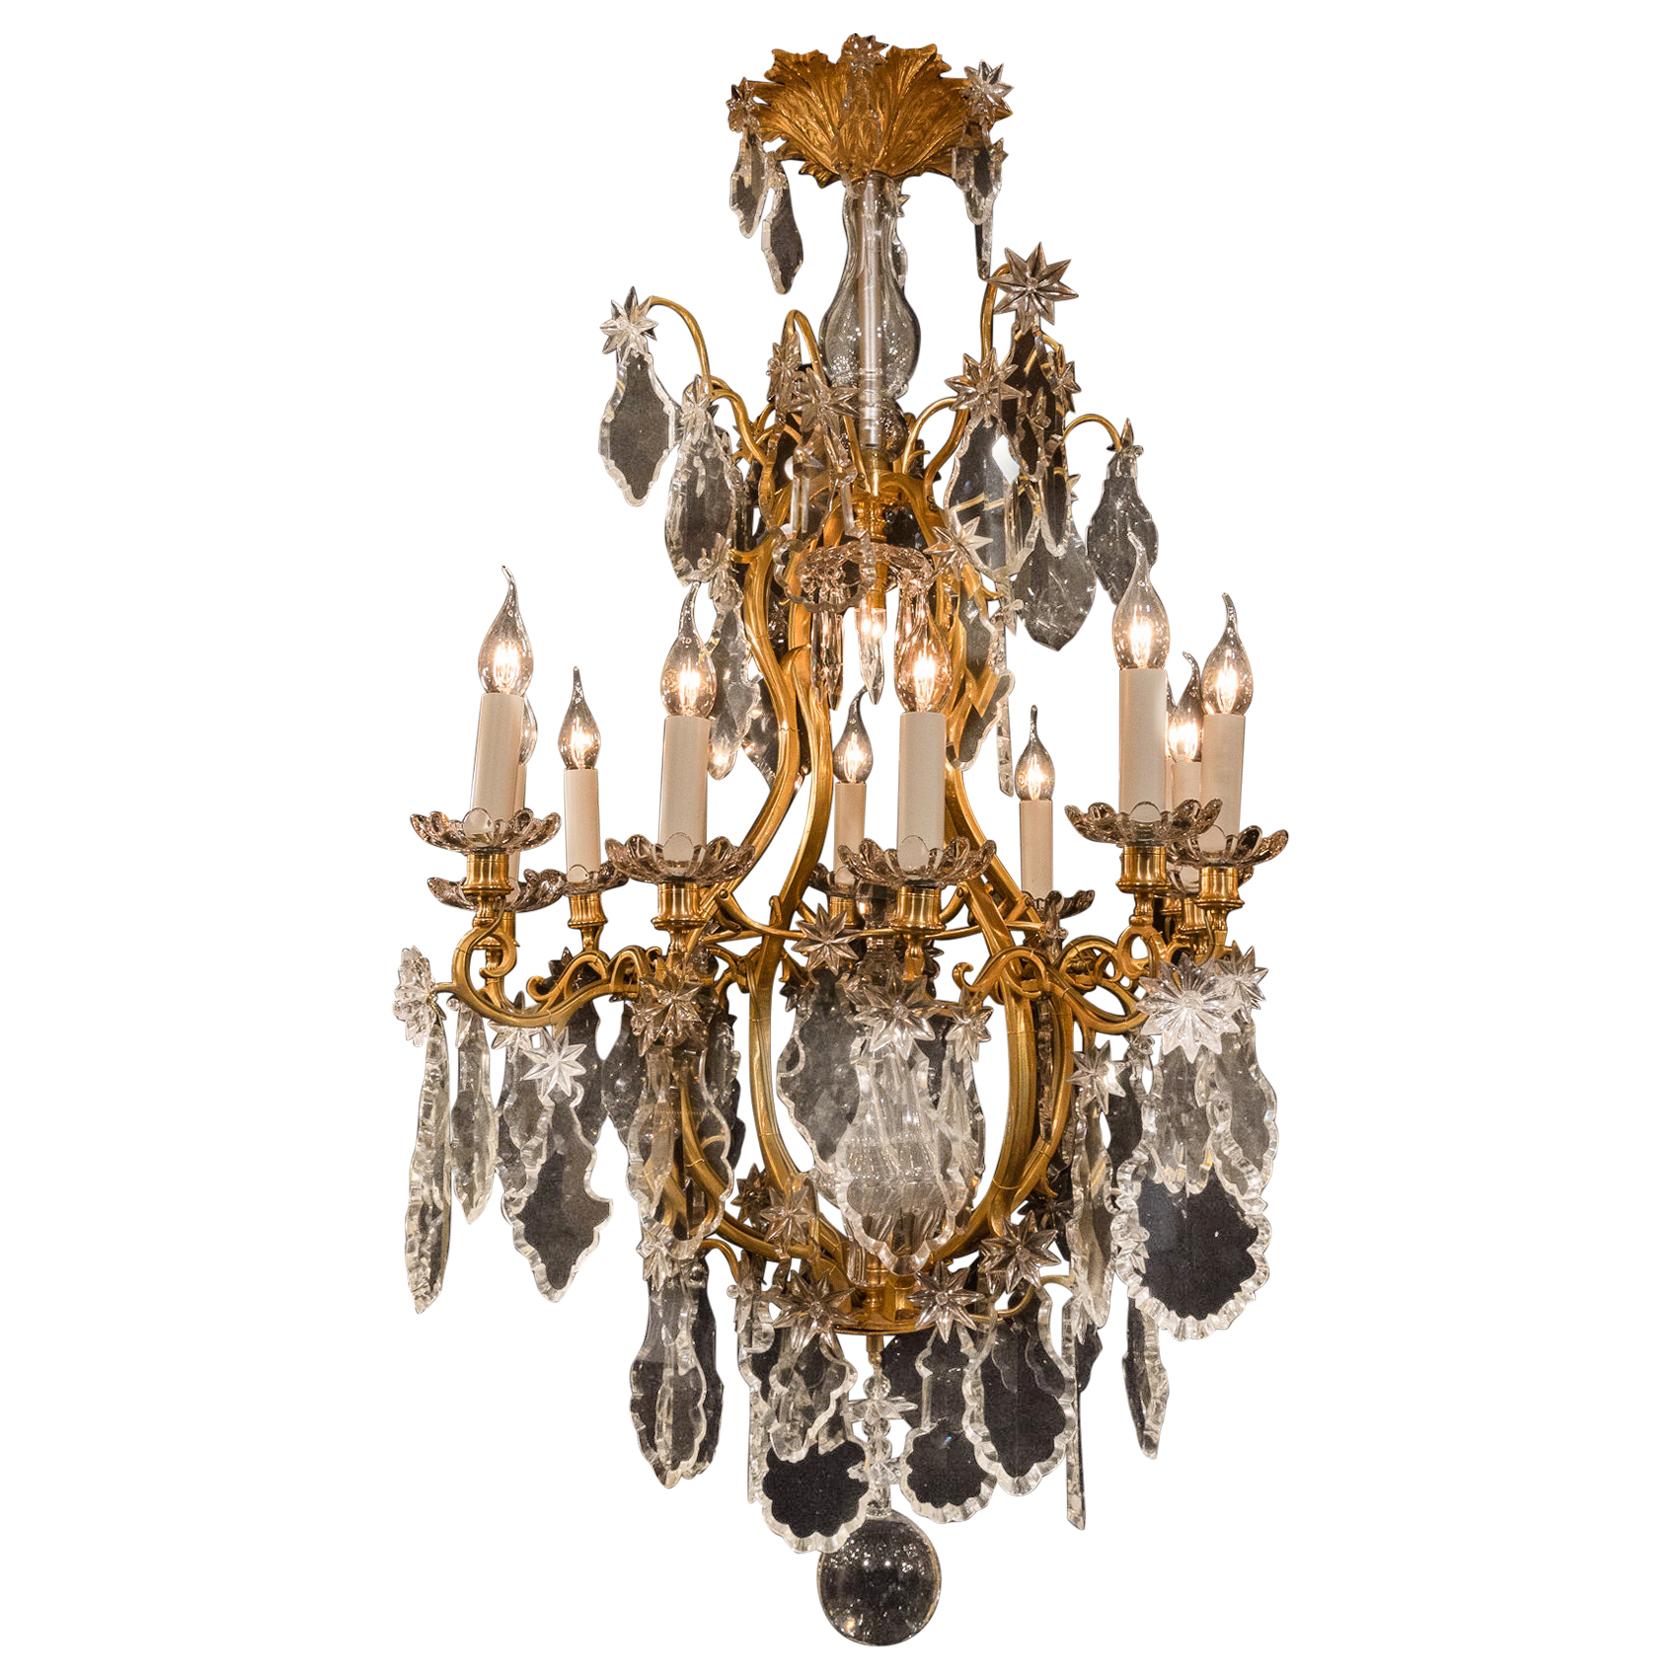 Baccarat, French Louis XV Style, Gilt-Bronze and Crystal Chandelier